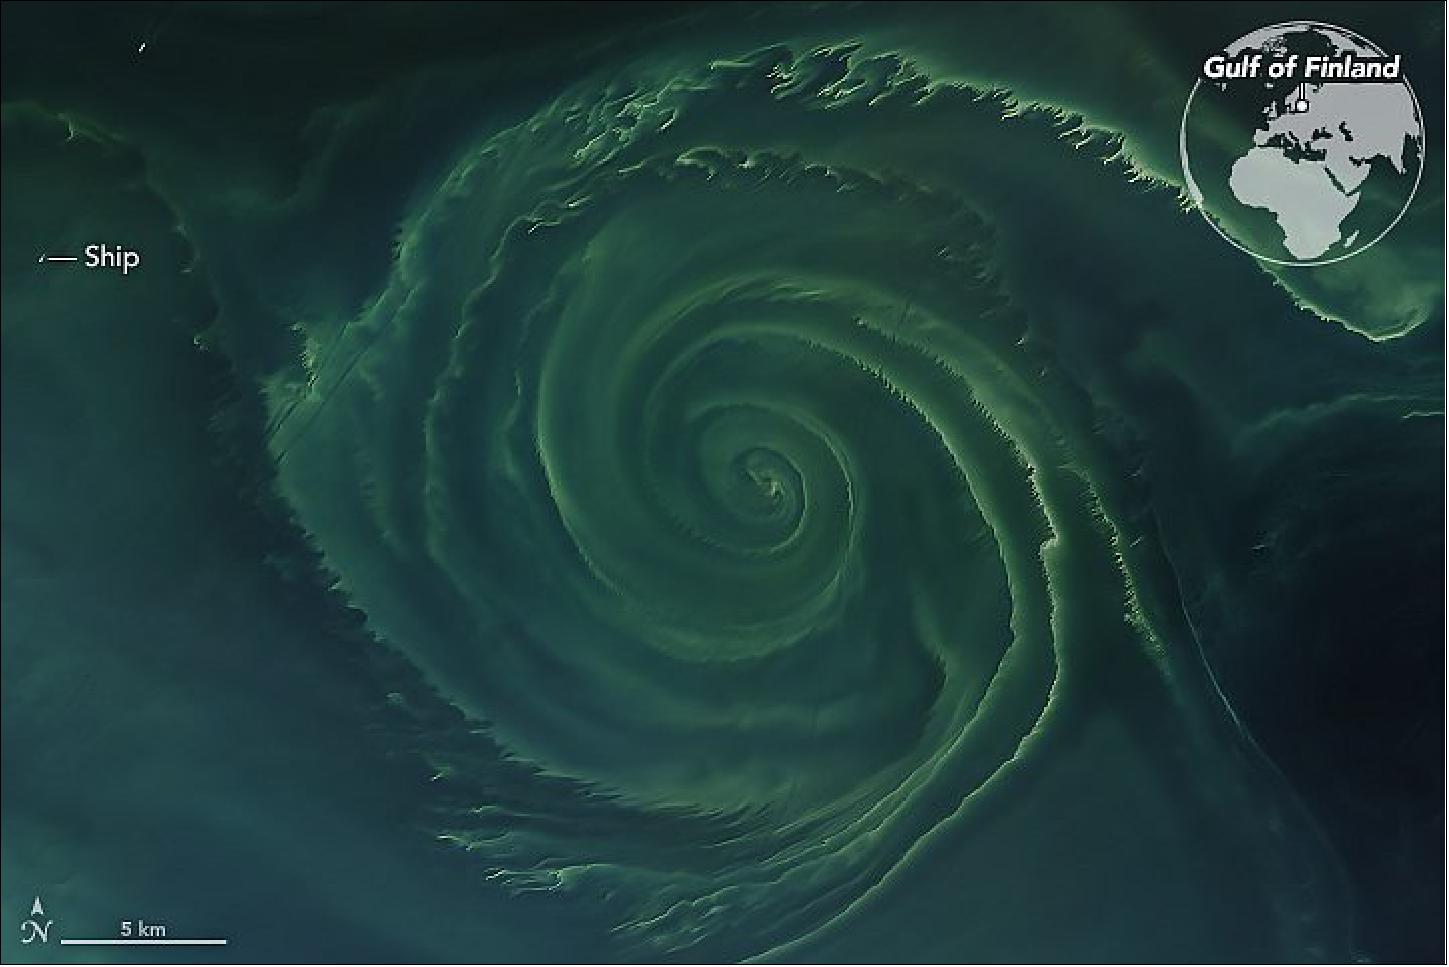 Figure 9: Summer blooms in the Baltic Sea. PACE's Ocean Color Instrument (OCI) will give scientists valuable information about phytoplankton species, community structure and health. Understanding phytoplankton health can help predict harmful algal blooms, or HABs, which can generate harmful toxins that sicken marine wildlife and humans and deplete oxygen in the water as bacteria feed on numerous dead algae (image credits: NASA Earth Observatory / Joshua Stevens & Lauren Dauphin)